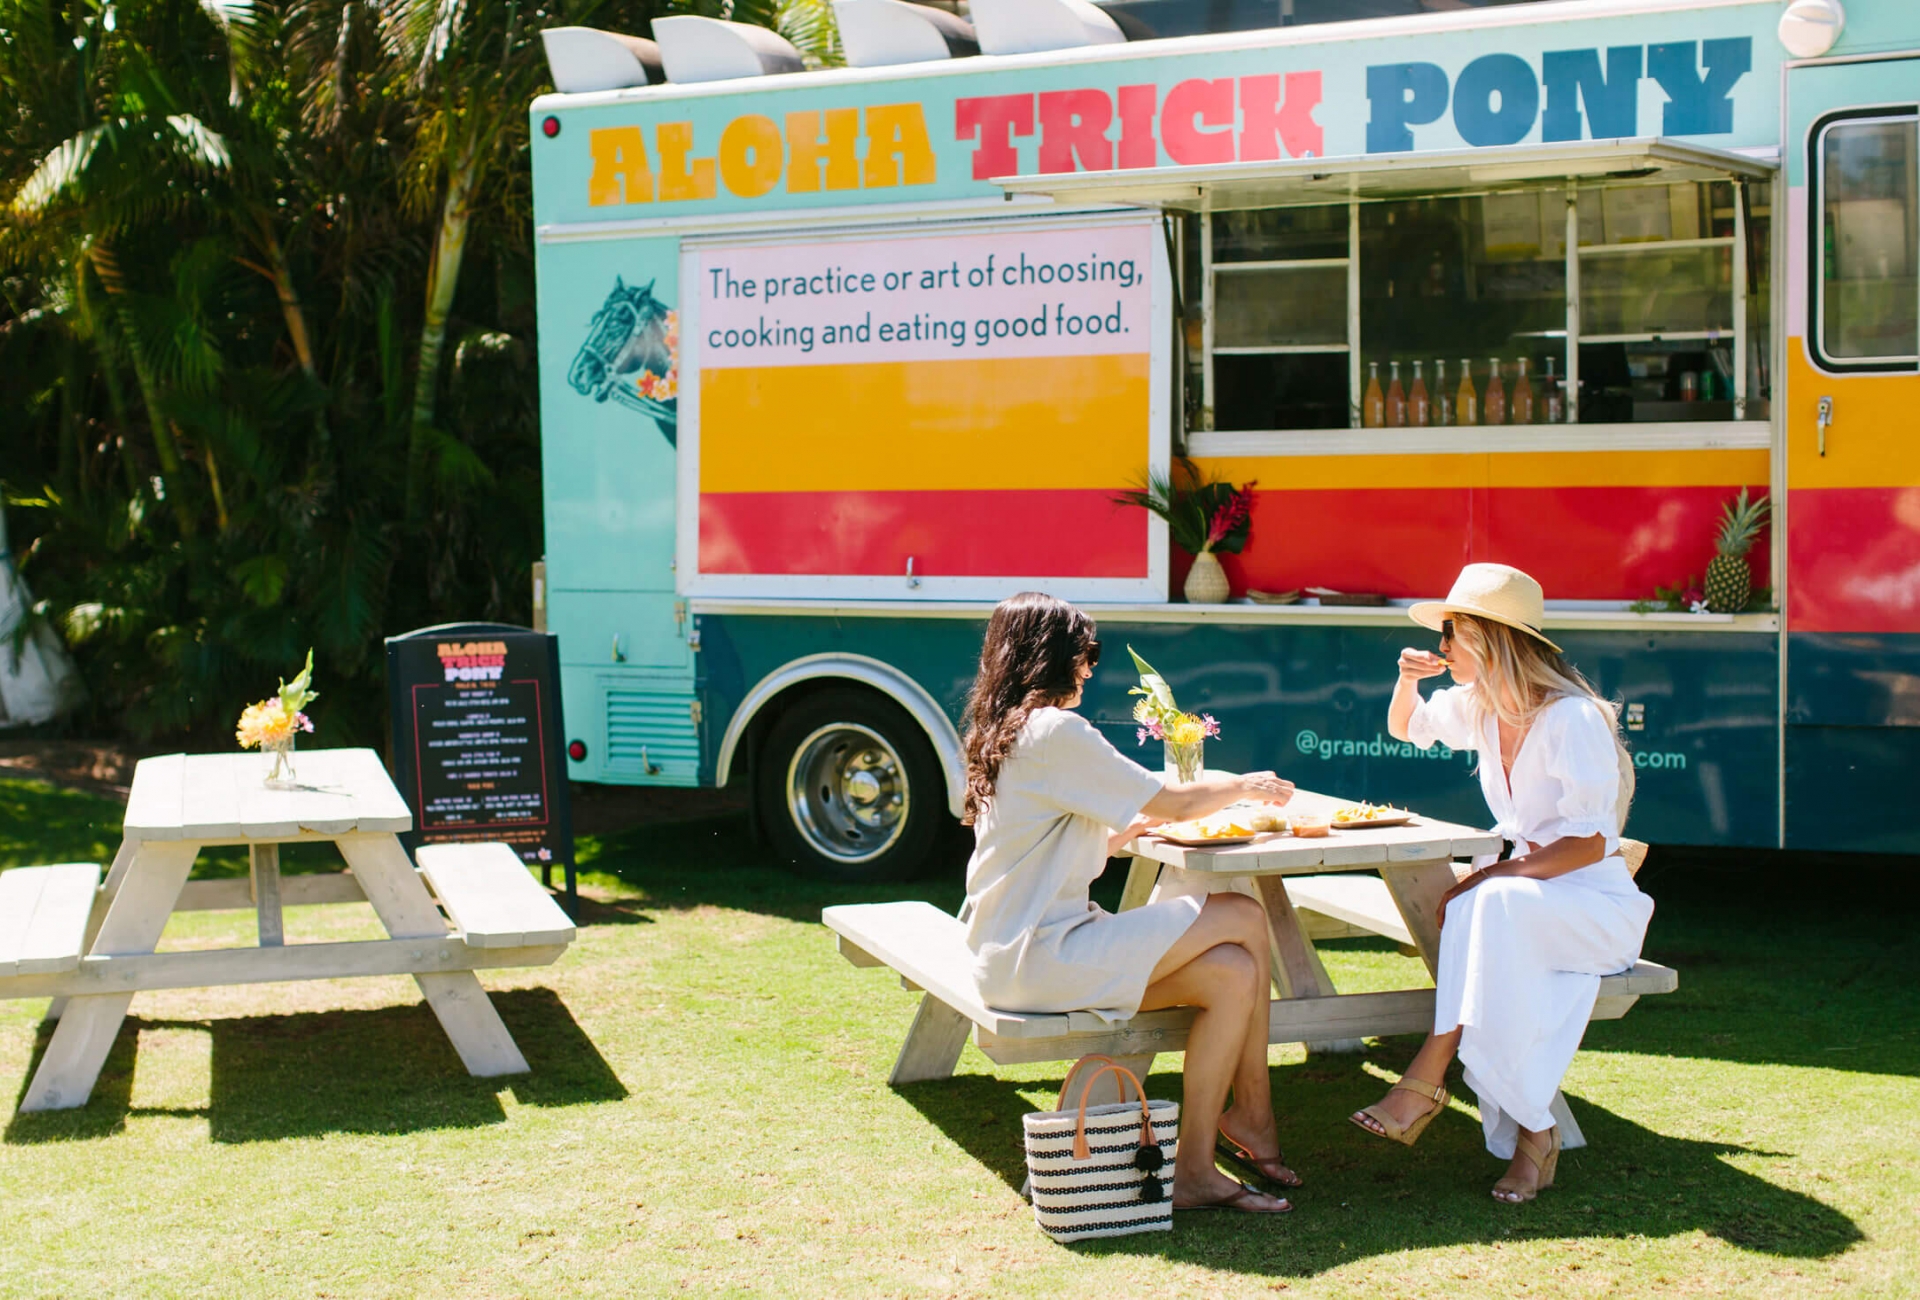 two people sit at a picnic table in front of the Aloha Trick Pony food truck